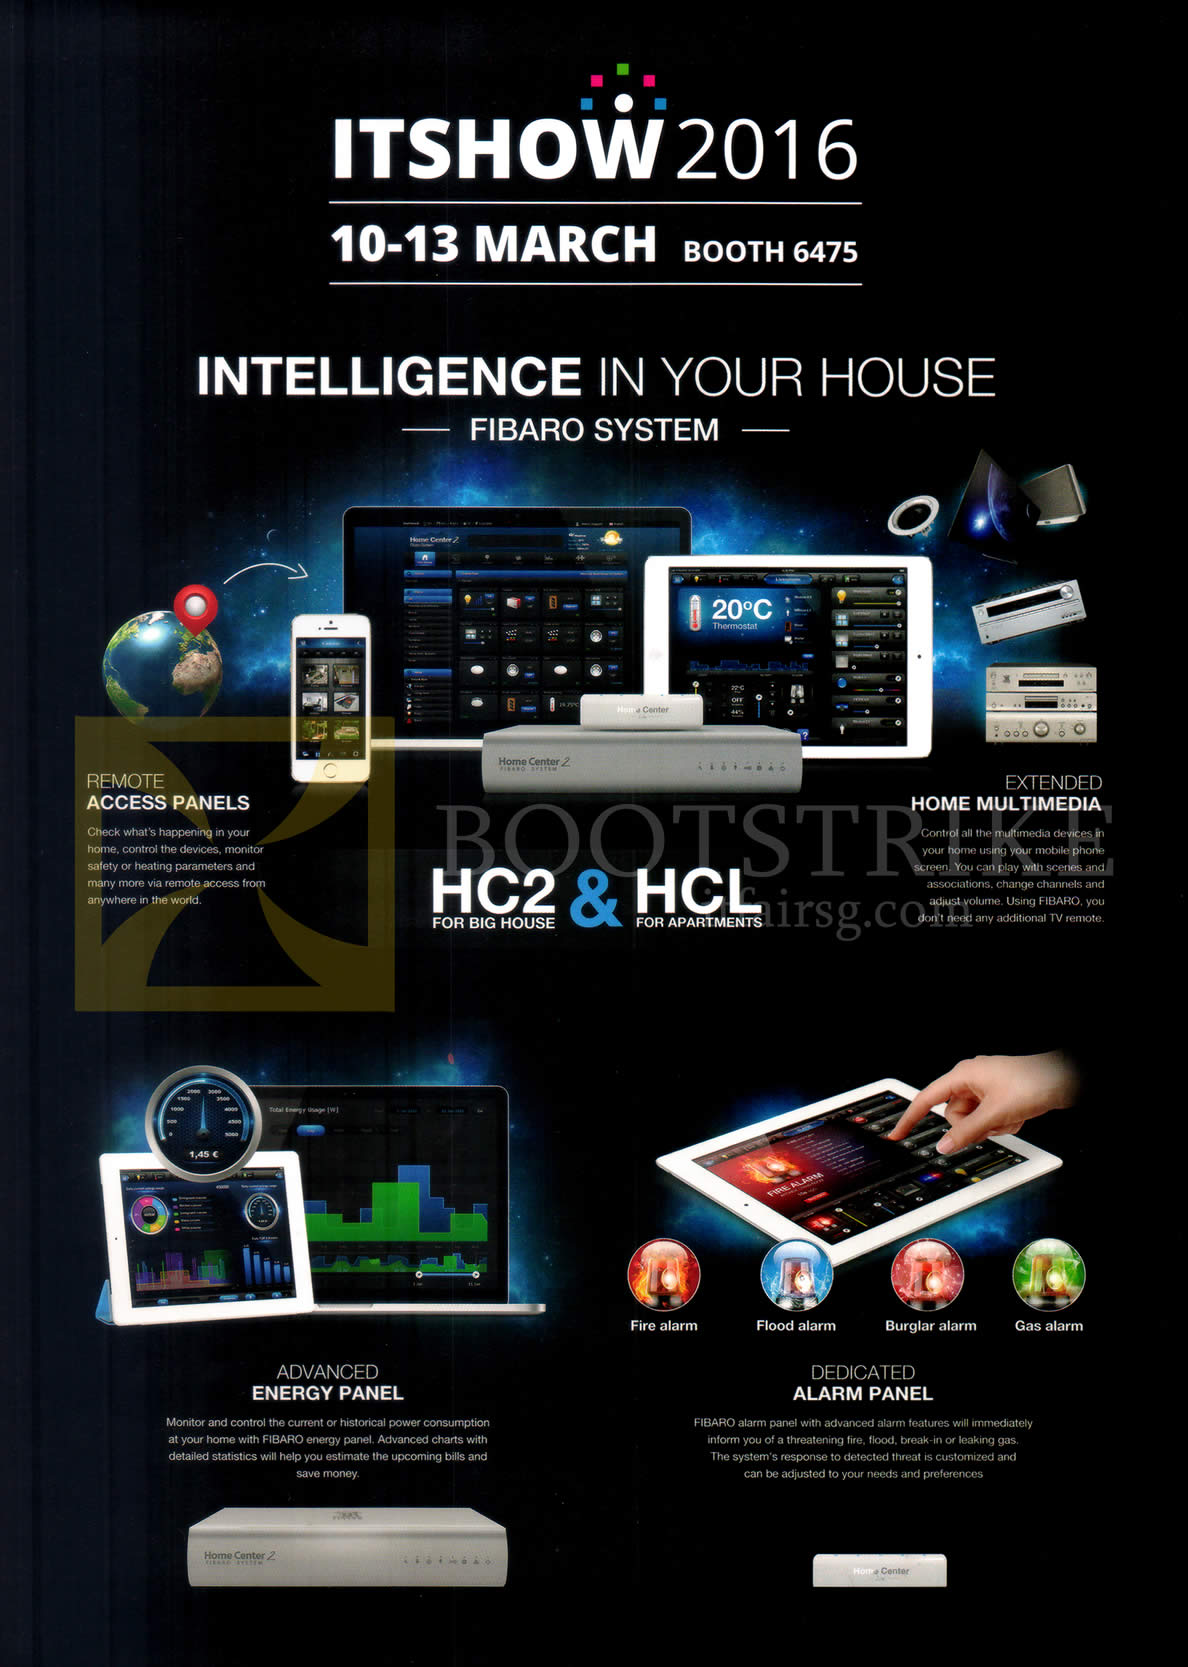 IT SHOW 2016 price list image brochure of Teck Tai Fibaro System Remote Access Panels, Extended Home Multimedia, Advanced Enery Level, Dedicated Alarm Panel